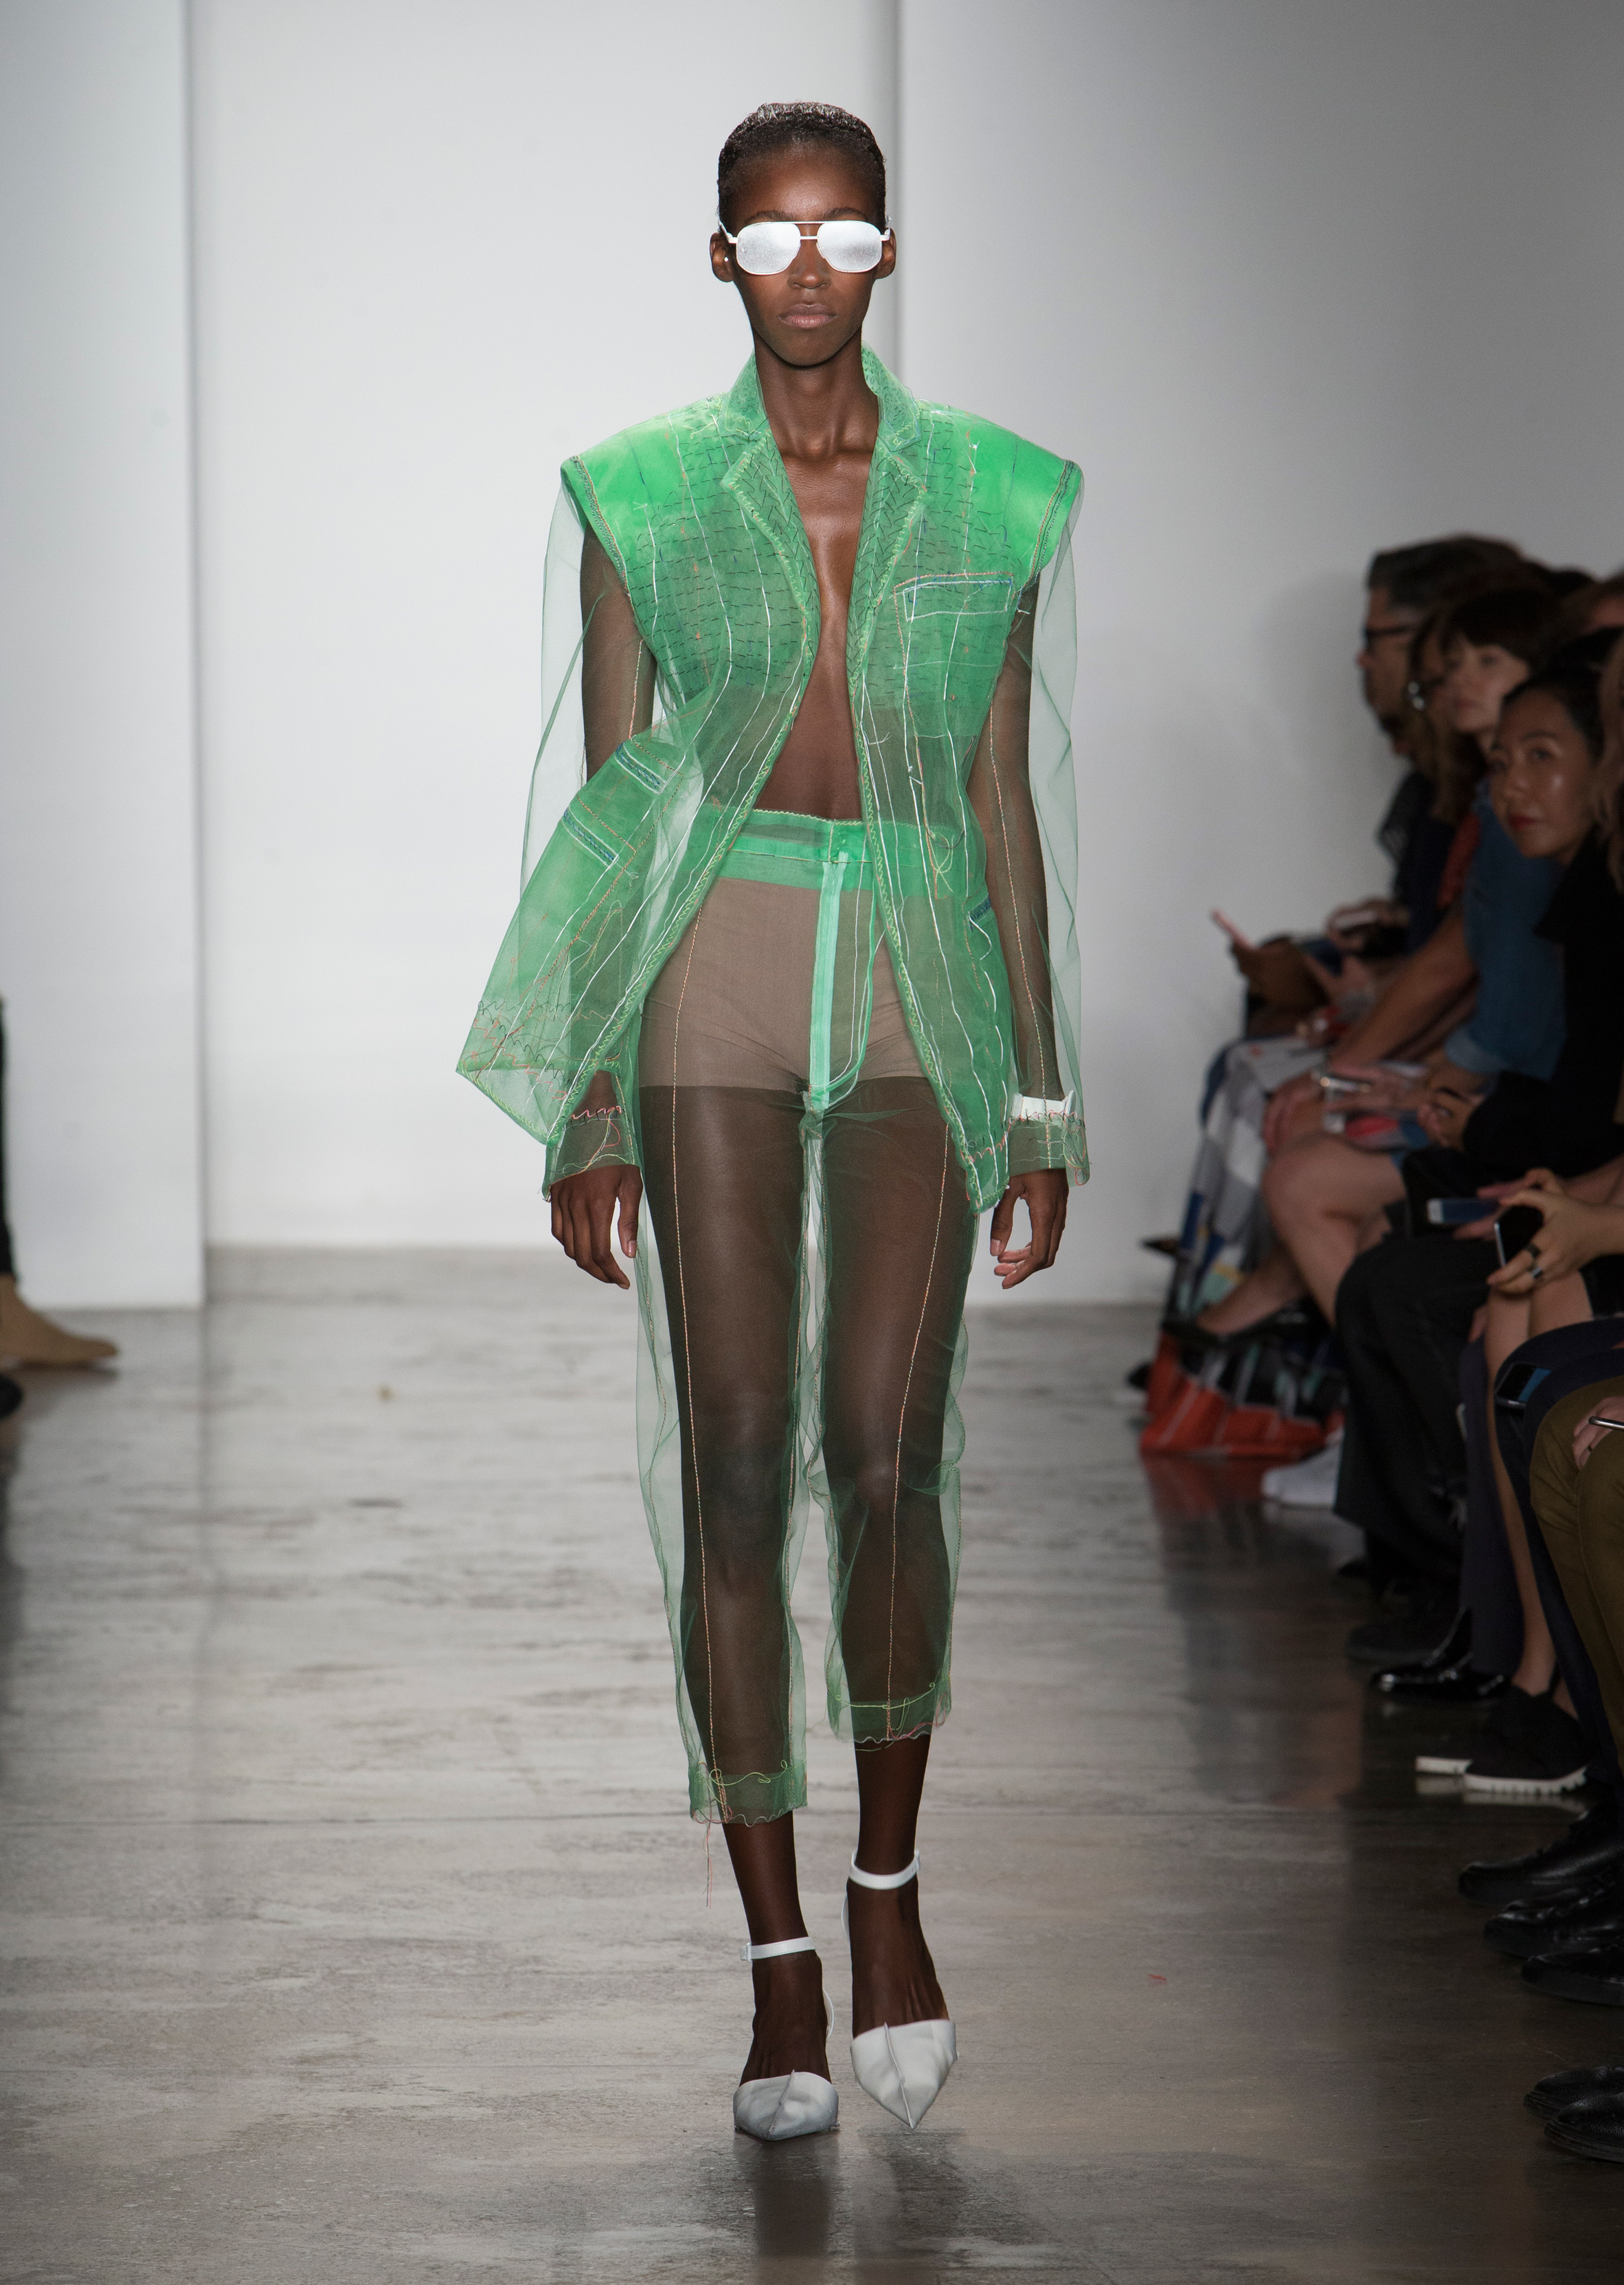 Gahee Lim's graduate fashion collection from Parsons School of Design